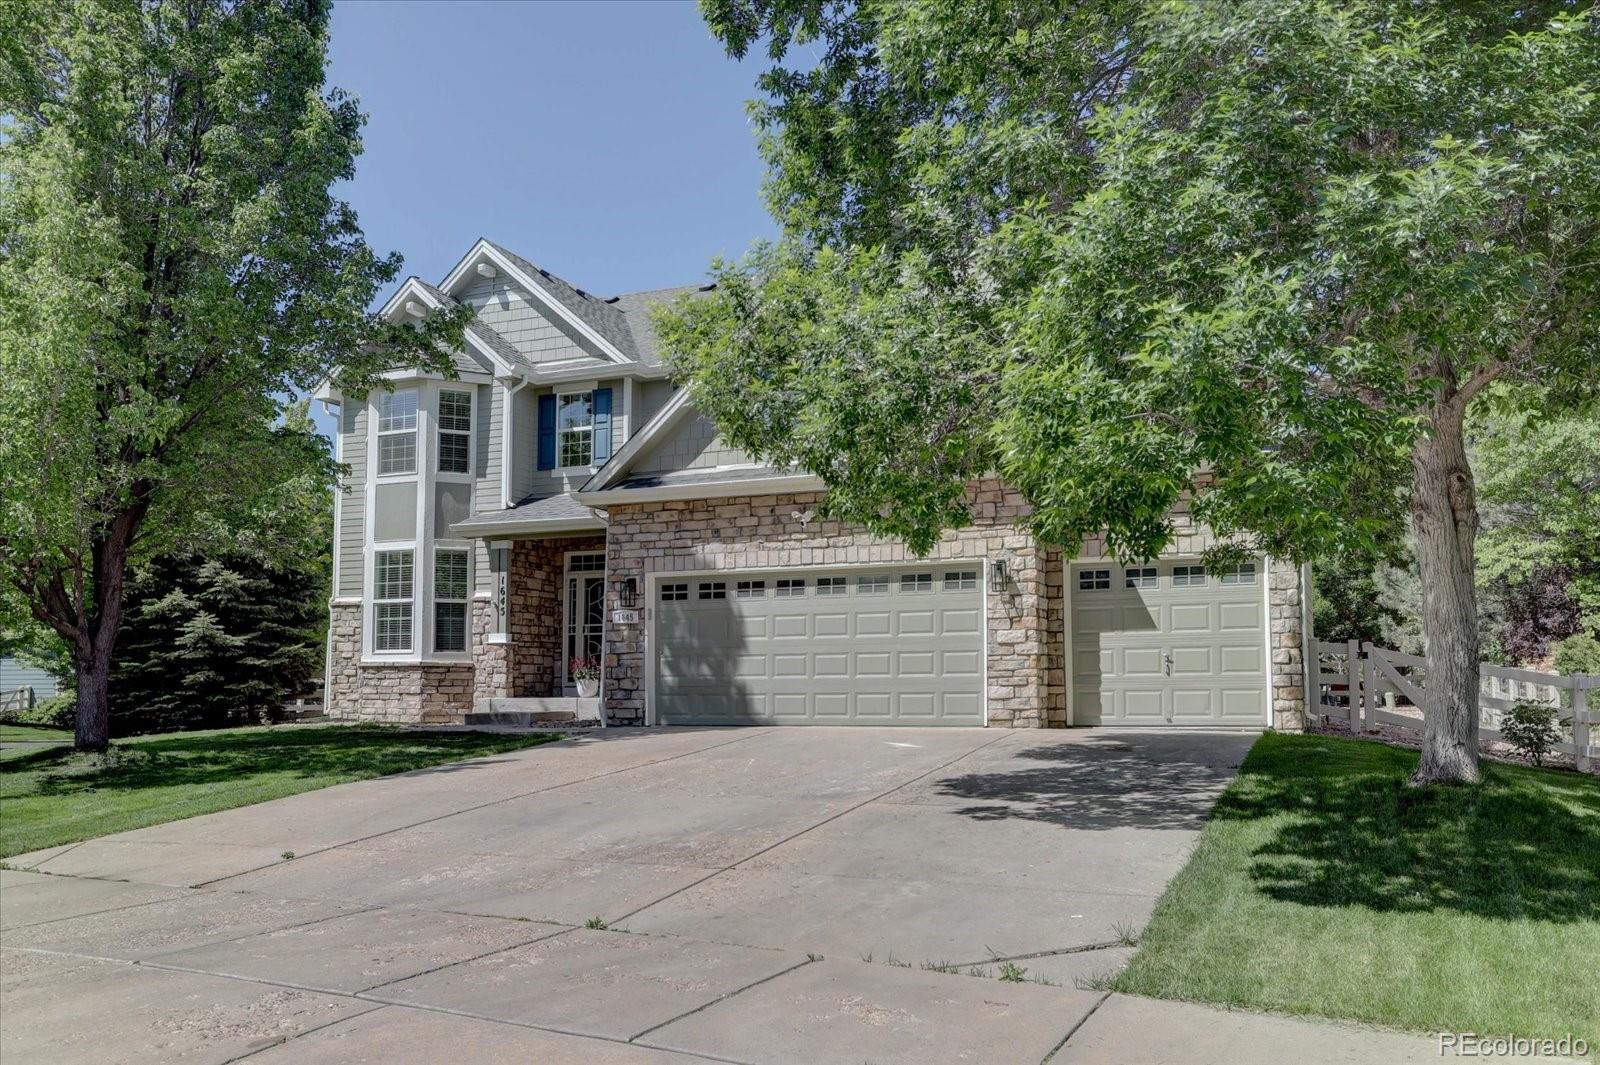 Report Image for 1645 W 130th Court,Westminster, Colorado